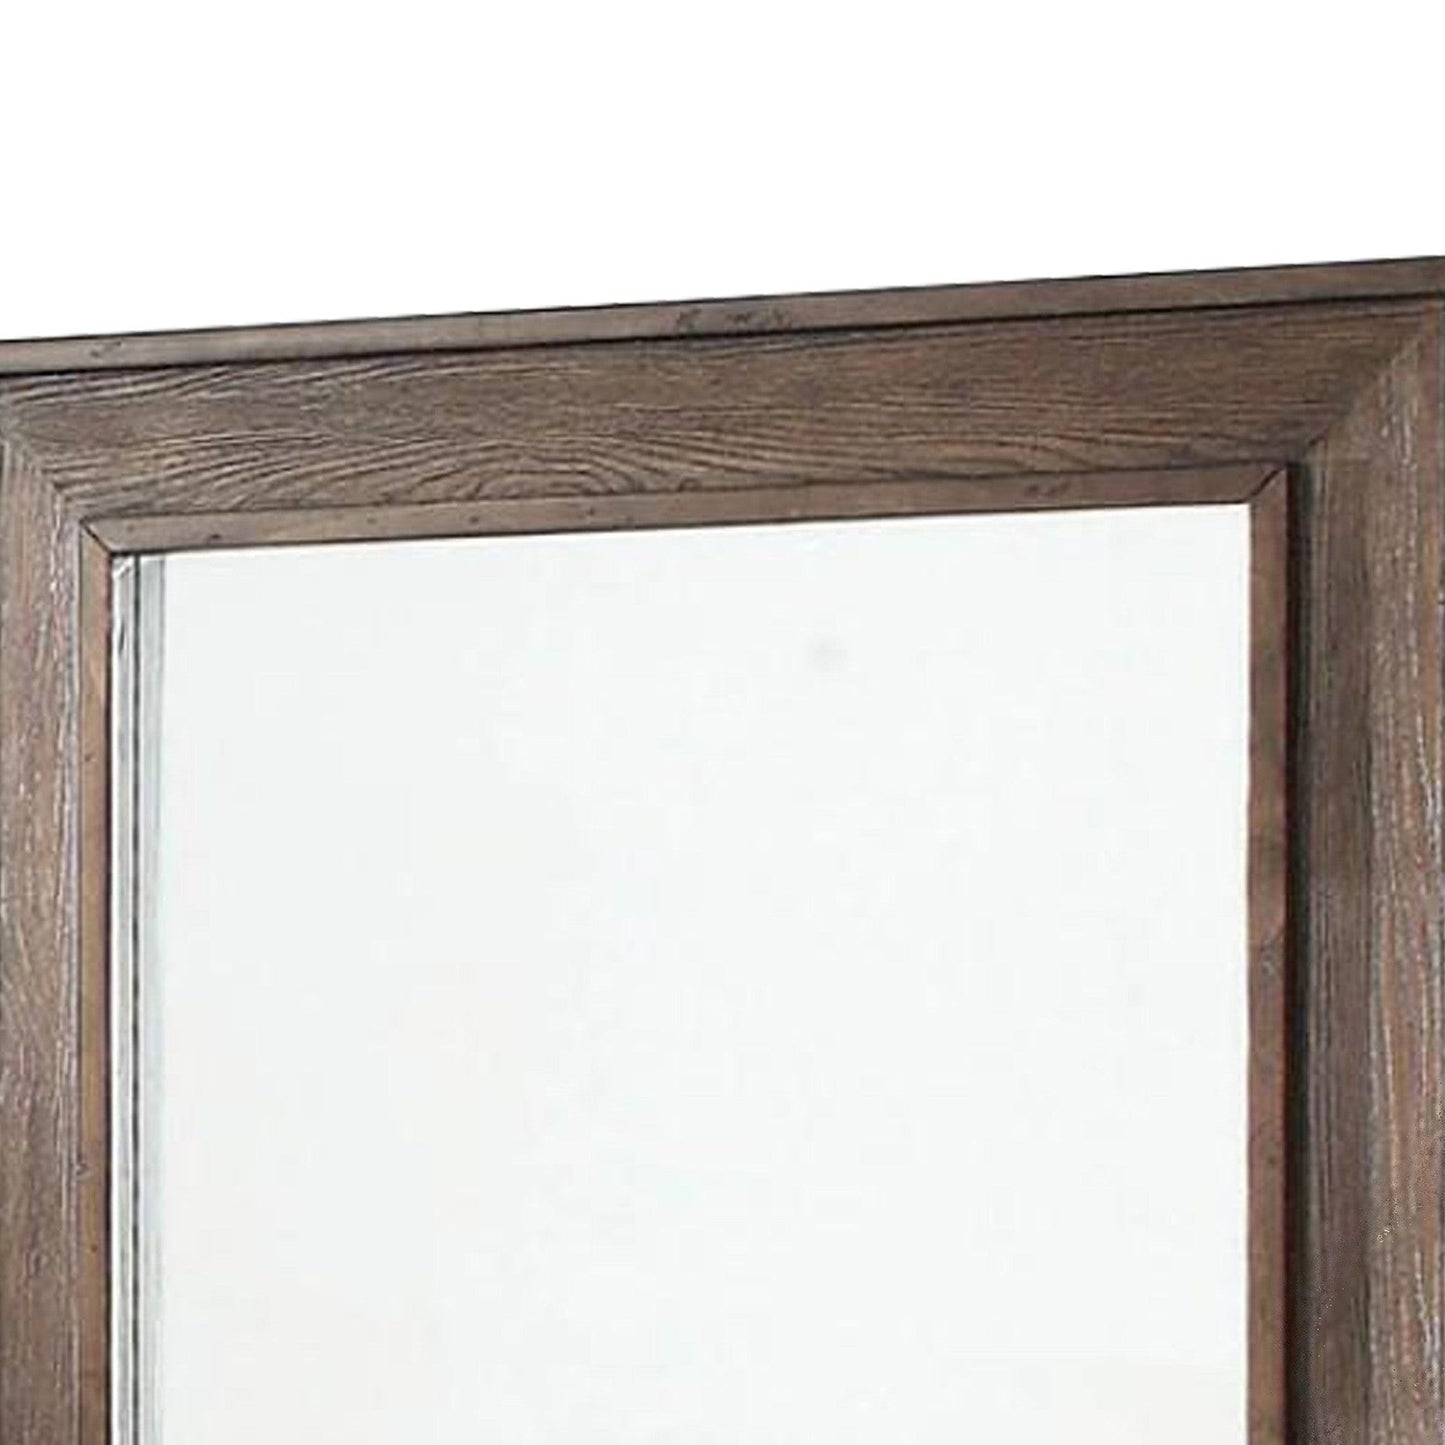 Benzara Brown Wooden Frame Mirror With Raised Edges and Grain Details